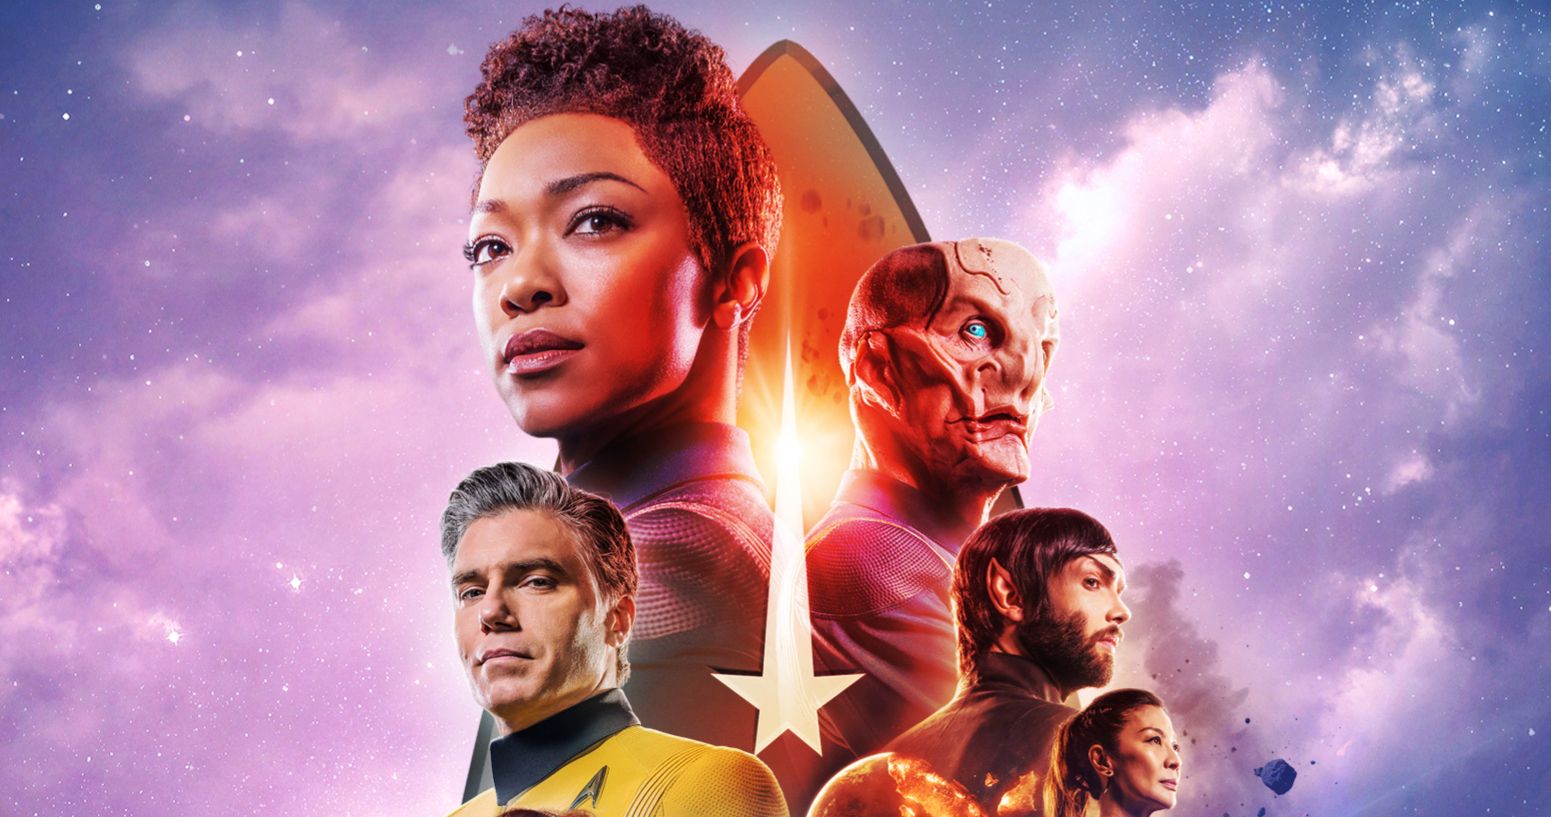 Star Trek: Discovery Season 2 Arrives on Blu-ray, DVD with 2 Hours of Extras